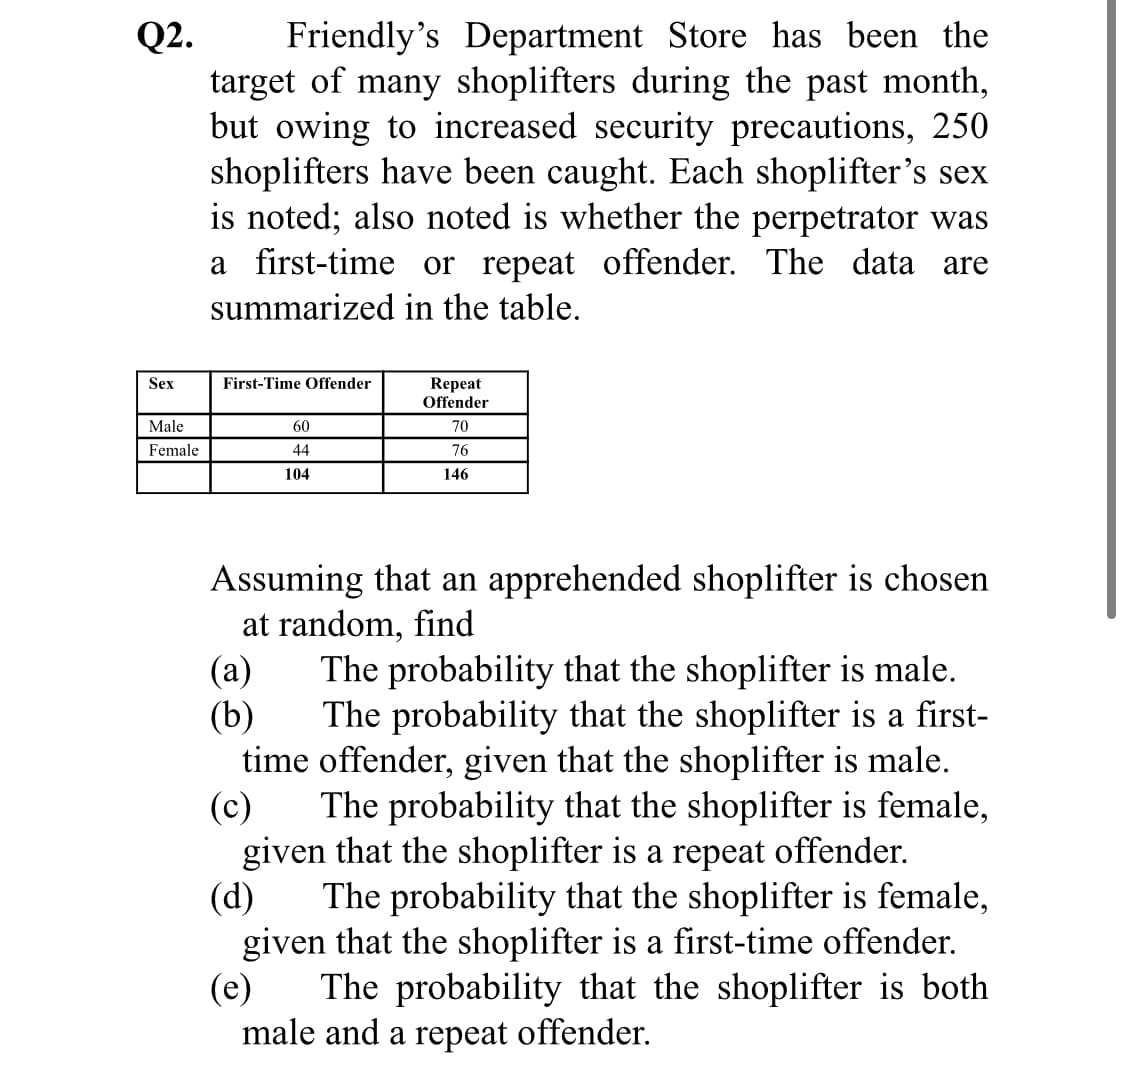 Friendly's Department Store has been the
target of many shoplifters during the past month,
but owing to increased security precautions, 250
shoplifters have been caught. Each shoplifter's sex
is noted; also noted is whether the perpetrator was
a first-time or repeat offender. The data are
Q2.
summarized in the table.
Sex
First-Time Offender
Repeat
Offender
Male
60
70
Female
44
104
146
Assuming that an apprehended shoplifter is chosen
at random, find
(a)
The probability that the shoplifter is male.
The probability that the shoplifter is a first-
time offender, given that the shoplifter is male.
(c)
(b)
The probability that the shoplifter is female,
given that the shoplifter is a repeat offender.
